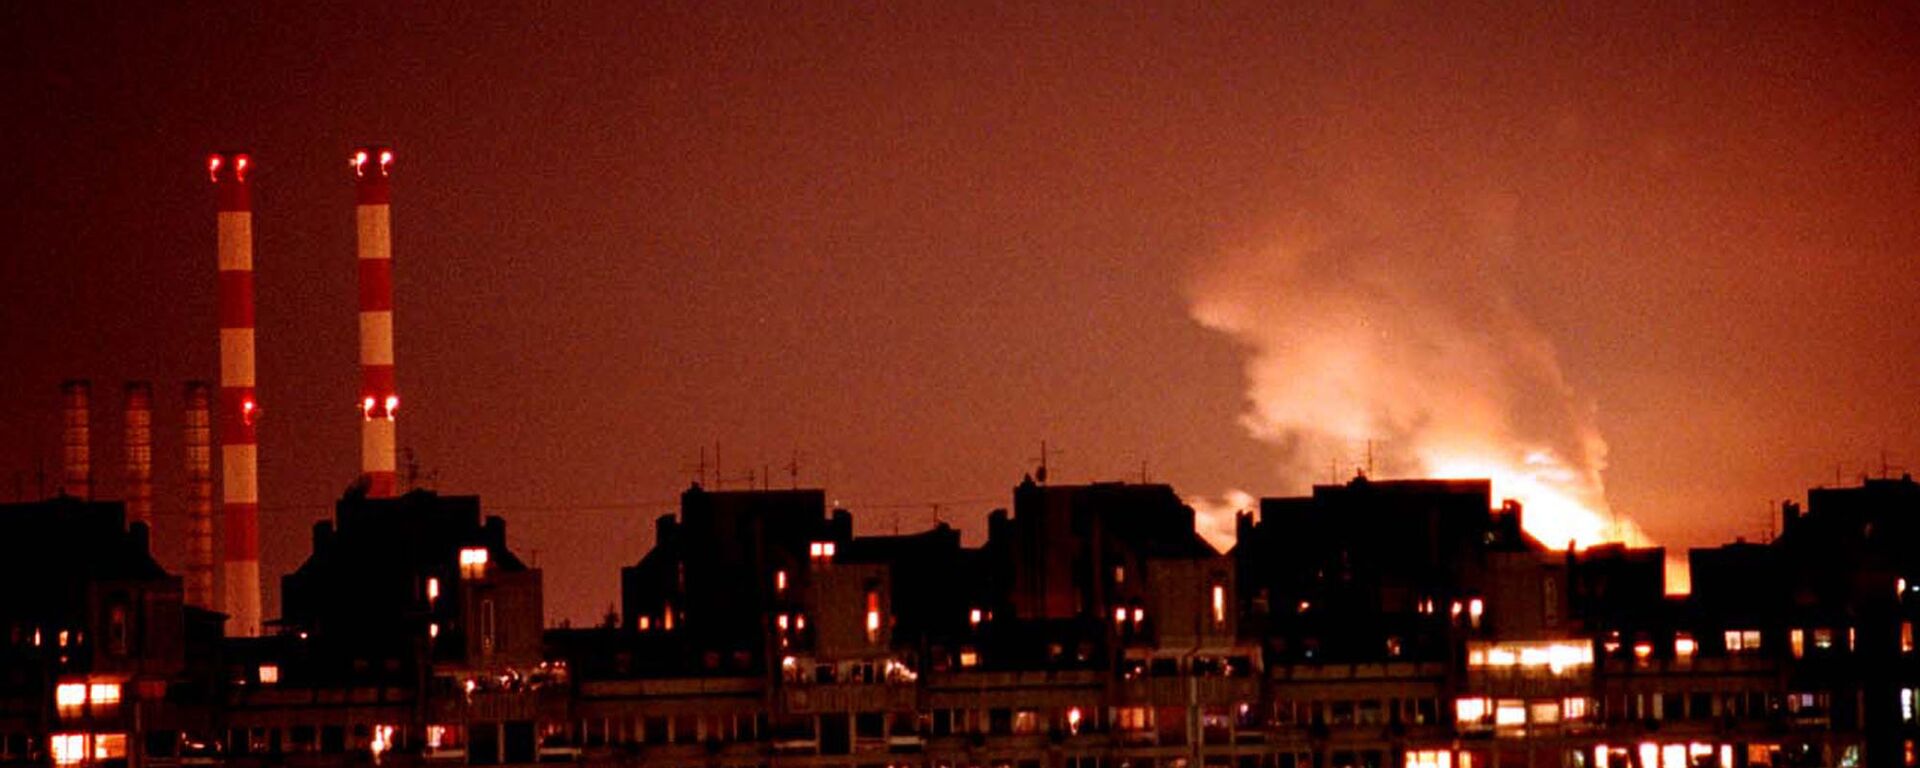 Flames from an explosion light up the Belgrade skyline near a power station after NATO cruise missiles and warplanes attacked Yugoslavia late Wednesday, March 24, 1999 - Sputnik Moldova-România, 1920, 13.06.2016